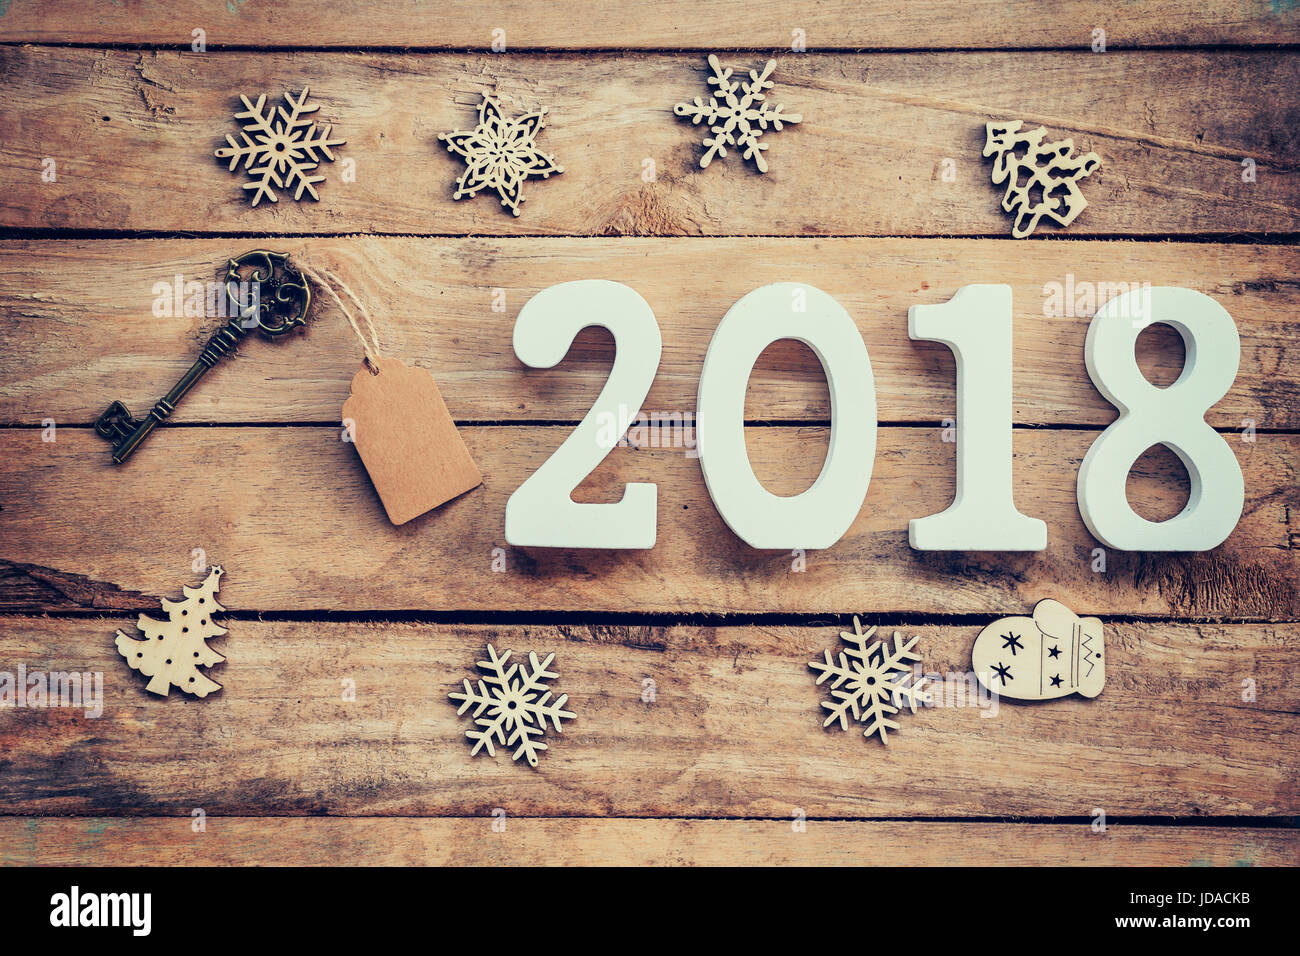 Old key with tag and wooden numbers forming the number 2018, For the new year 2018 on a rustic wooden background. Stock Photo